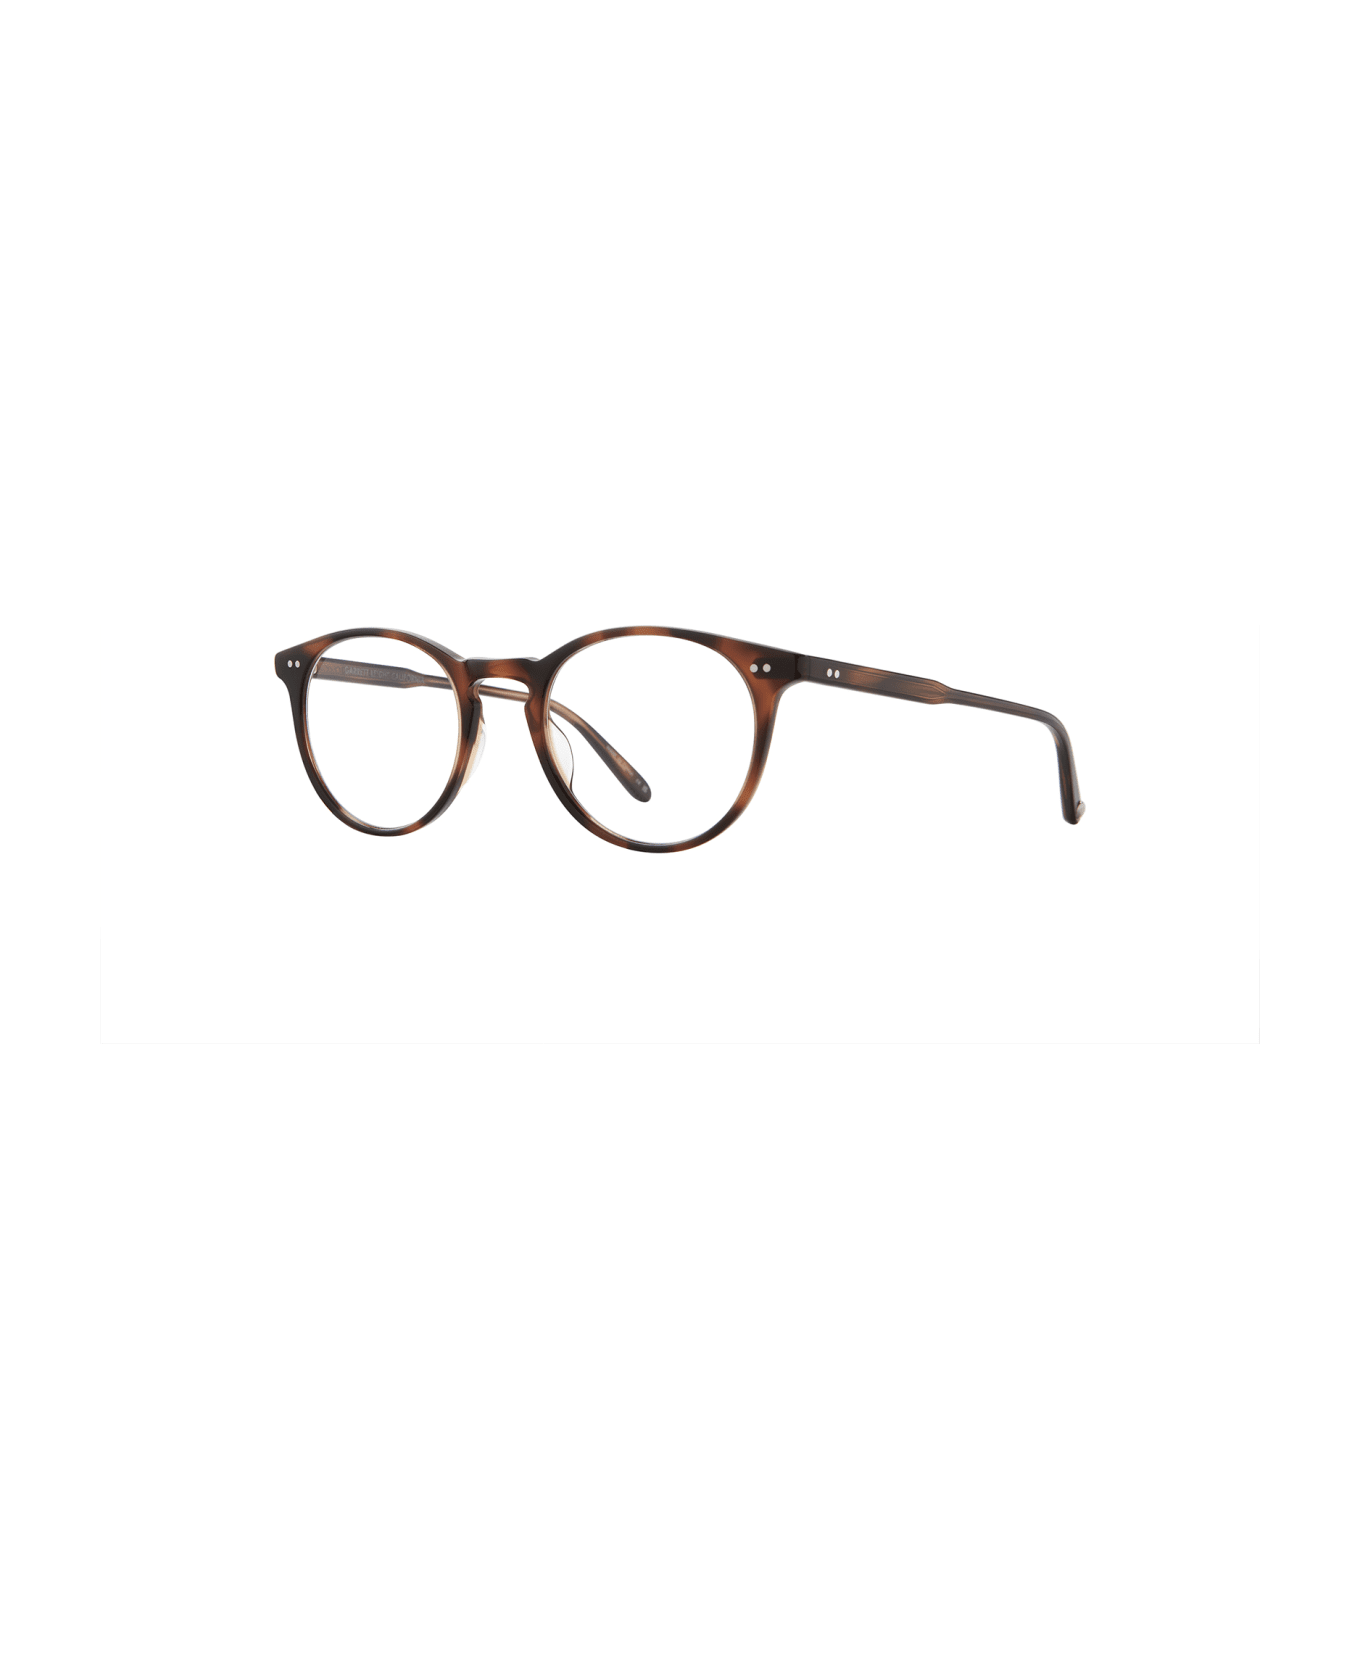 Garrett Leight Winward Spotted Brown Shell Glasses - Spotted Brown Shell